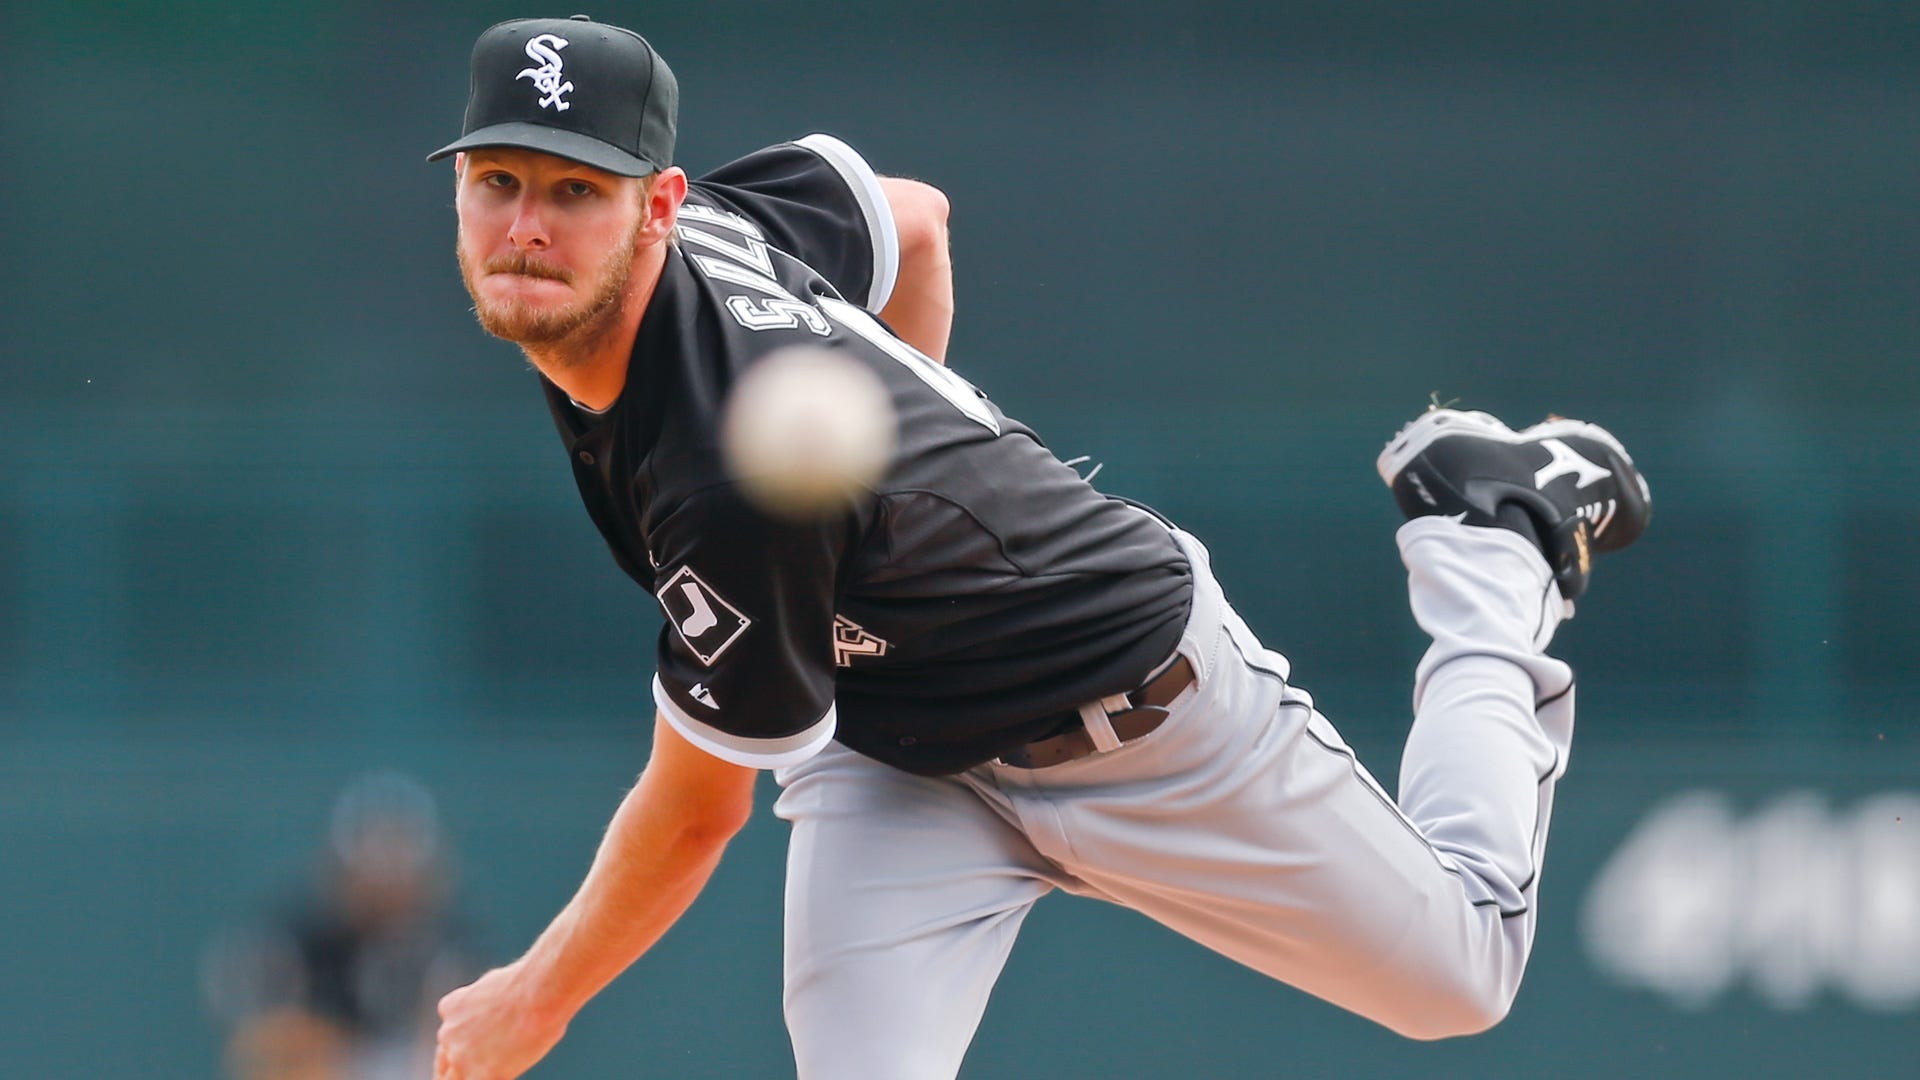 Will the White Sox Shock the World? Read Below for One Expert's